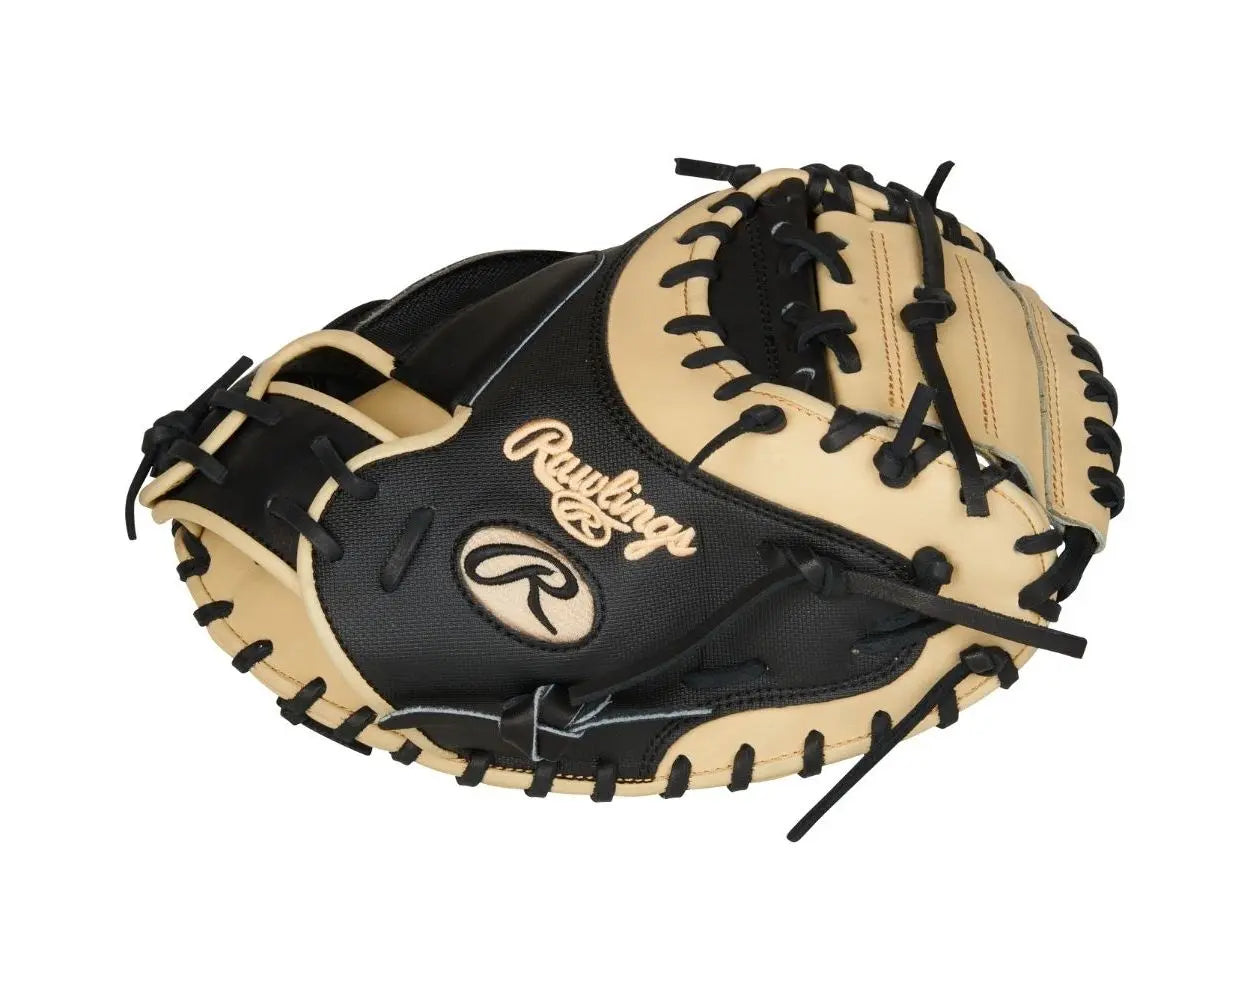 Rawlings Heart of the Hide Catchers Mitt - PROYM4BC